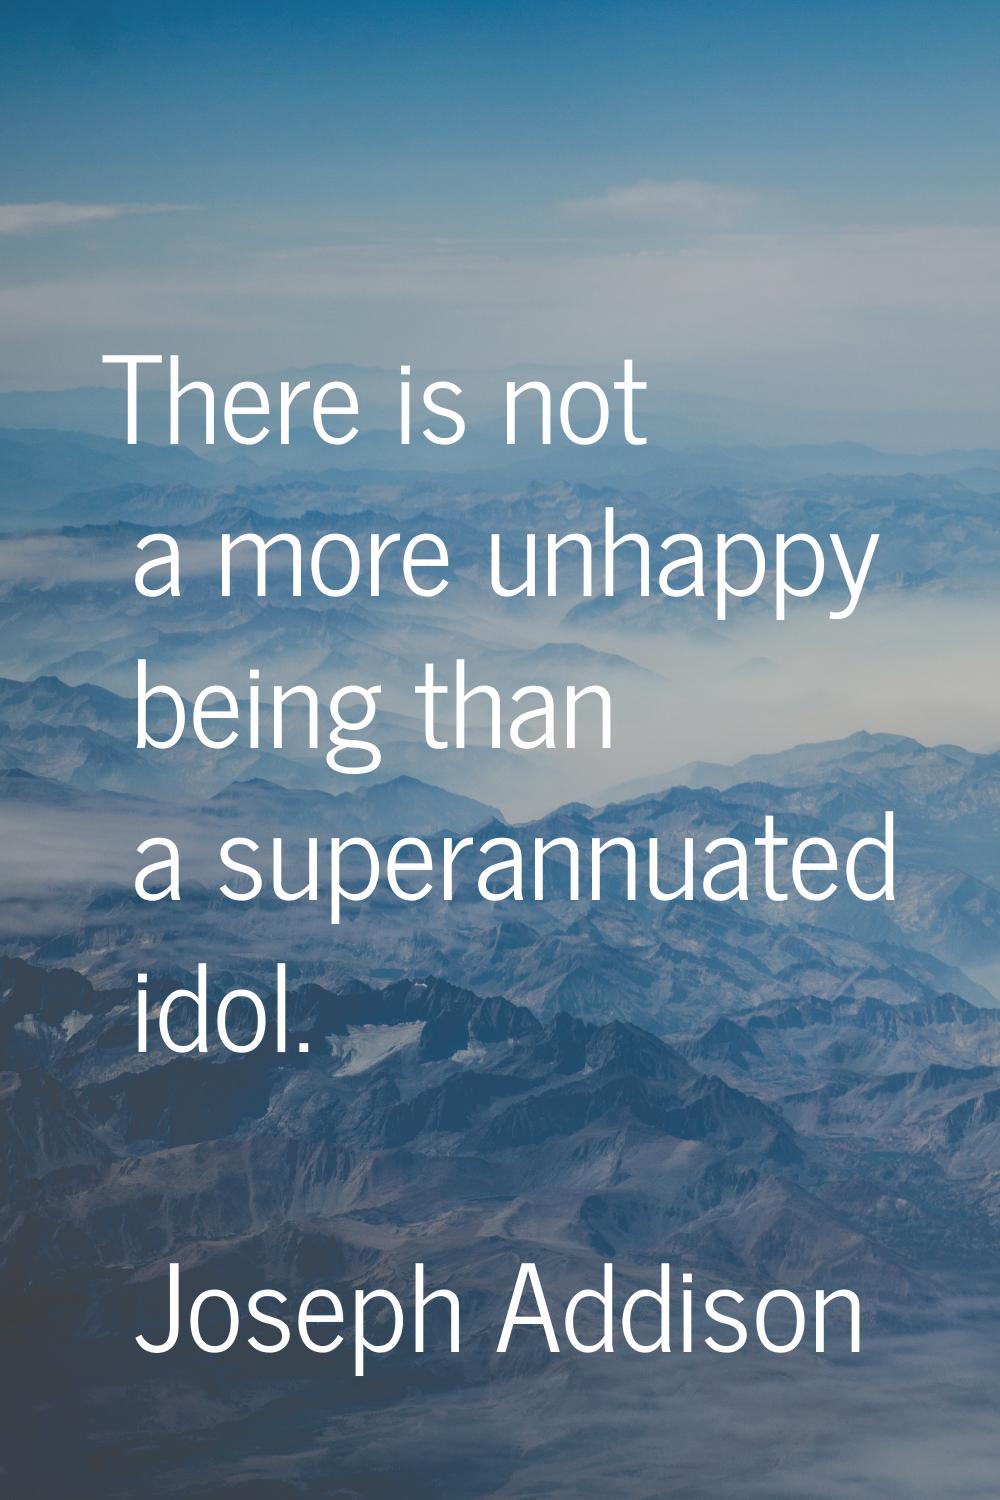 There is not a more unhappy being than a superannuated idol.